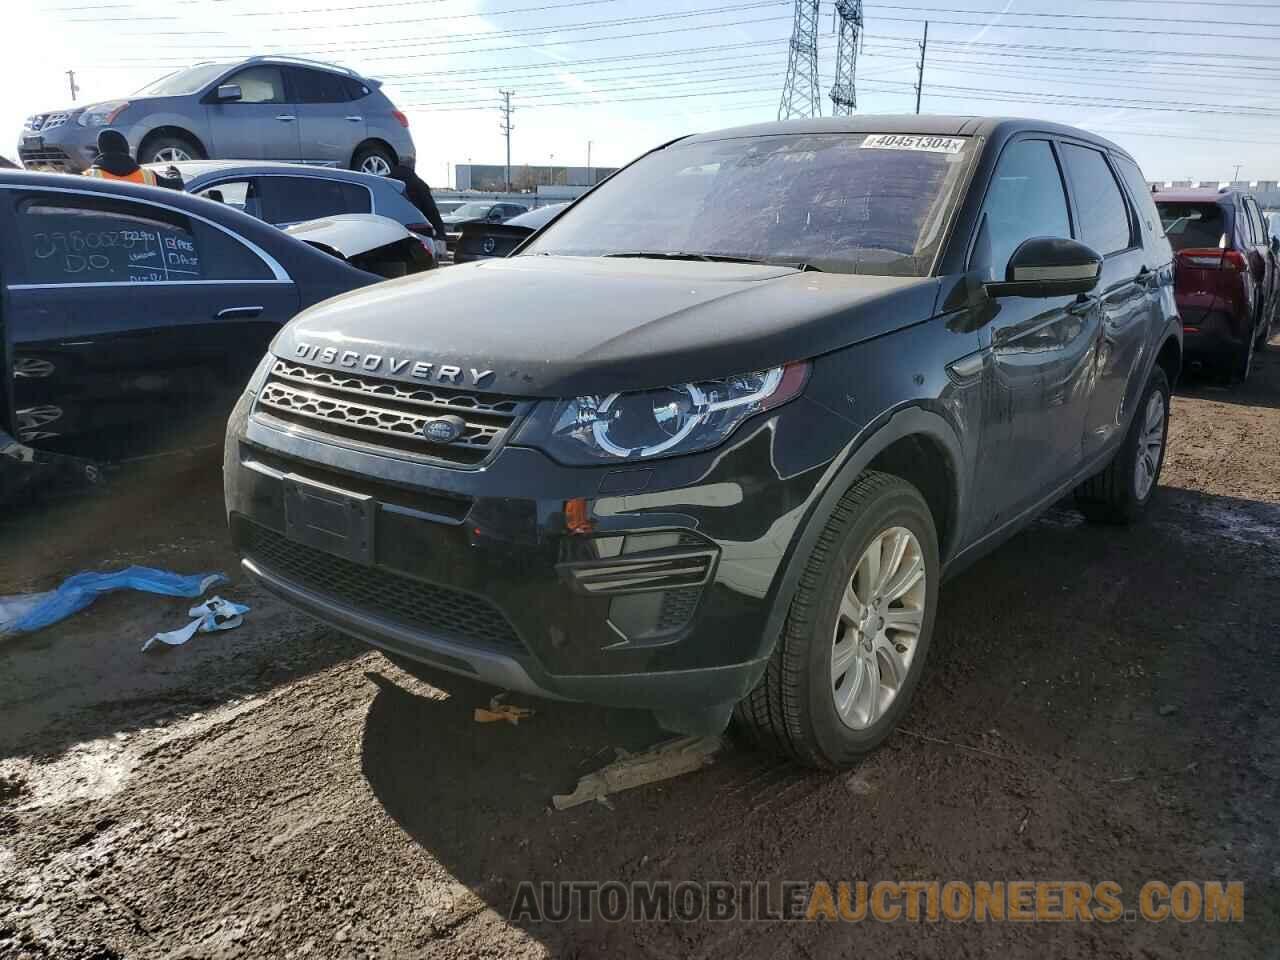 SALCP2RX8JH766896 LAND ROVER DISCOVERY 2018